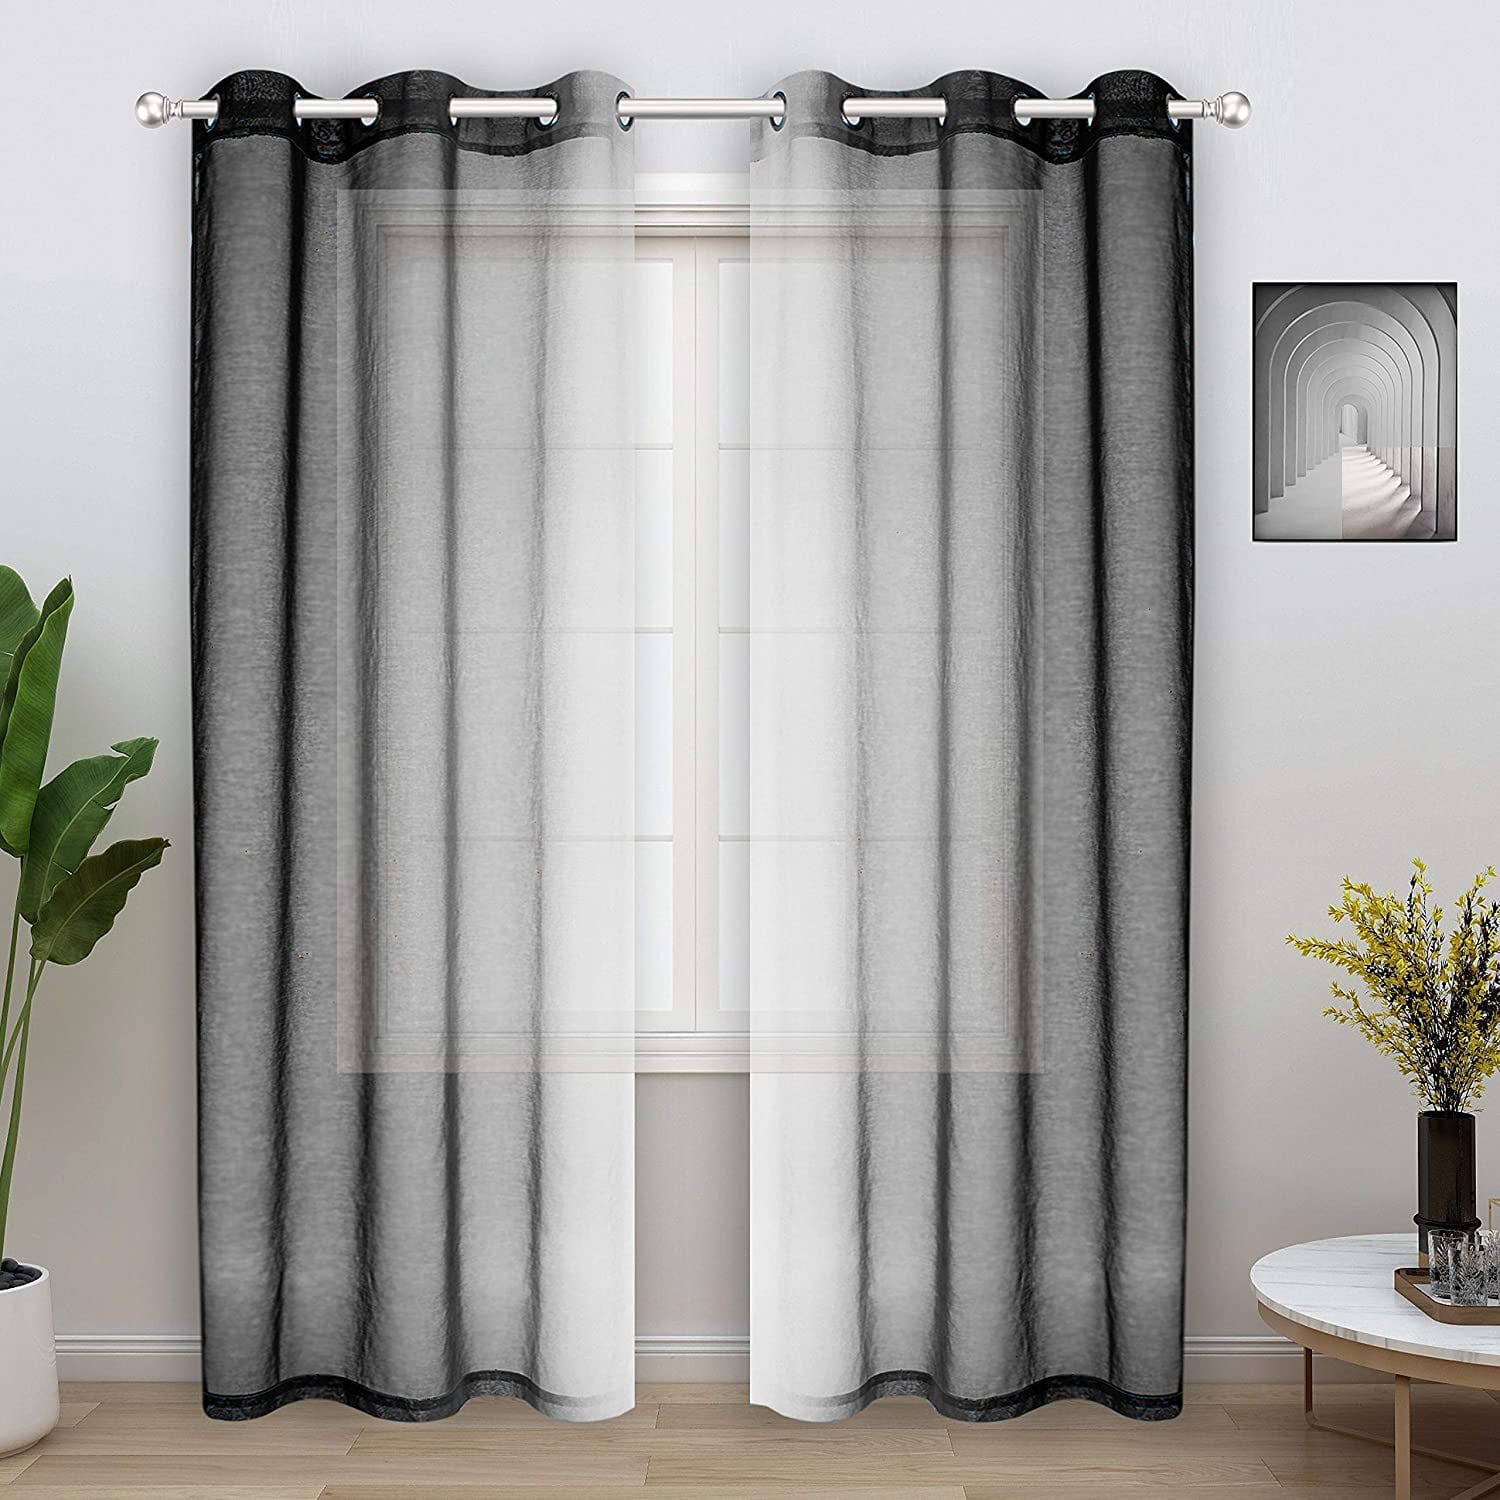 BYSURE Beige Blackout Curtains Wide 42 x 63 inches Long Room Darkening Curtains Drapes Thermal Insulated Grommet Curtains for Bedroom Curtains Set of 2 Panels